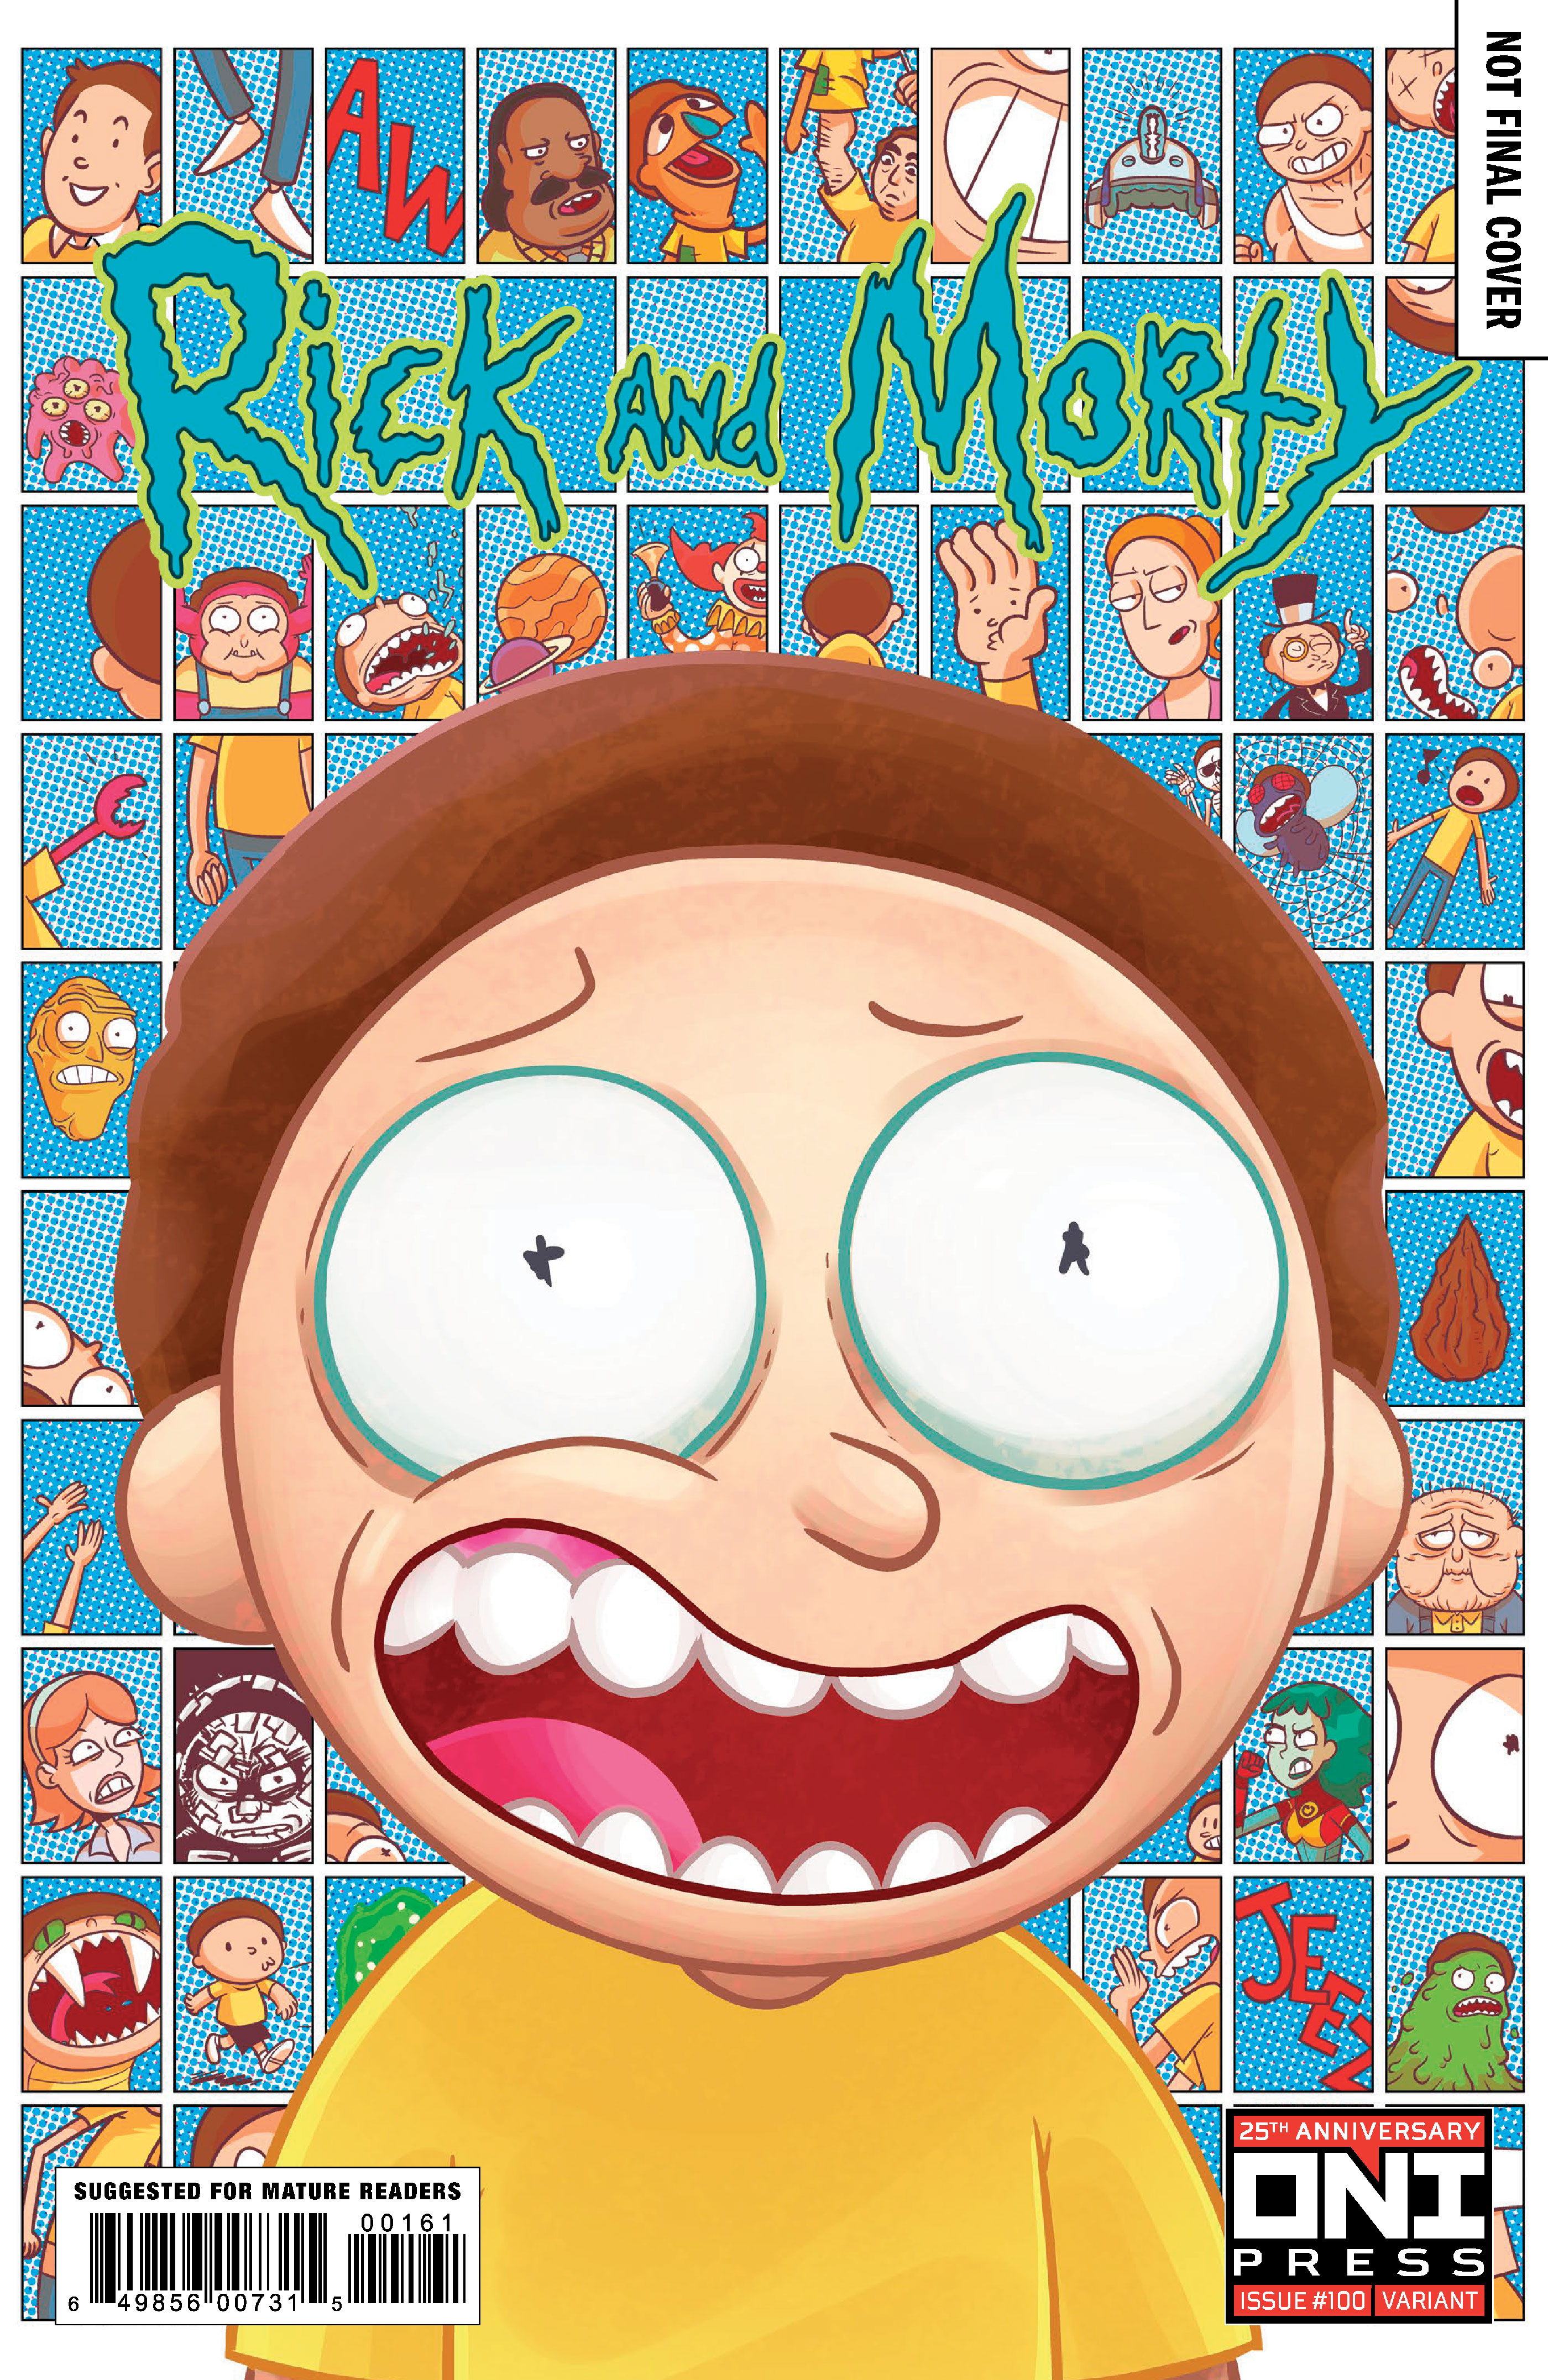 Rick and Morty #100 Cover F Fred Stresing Variant (2015)